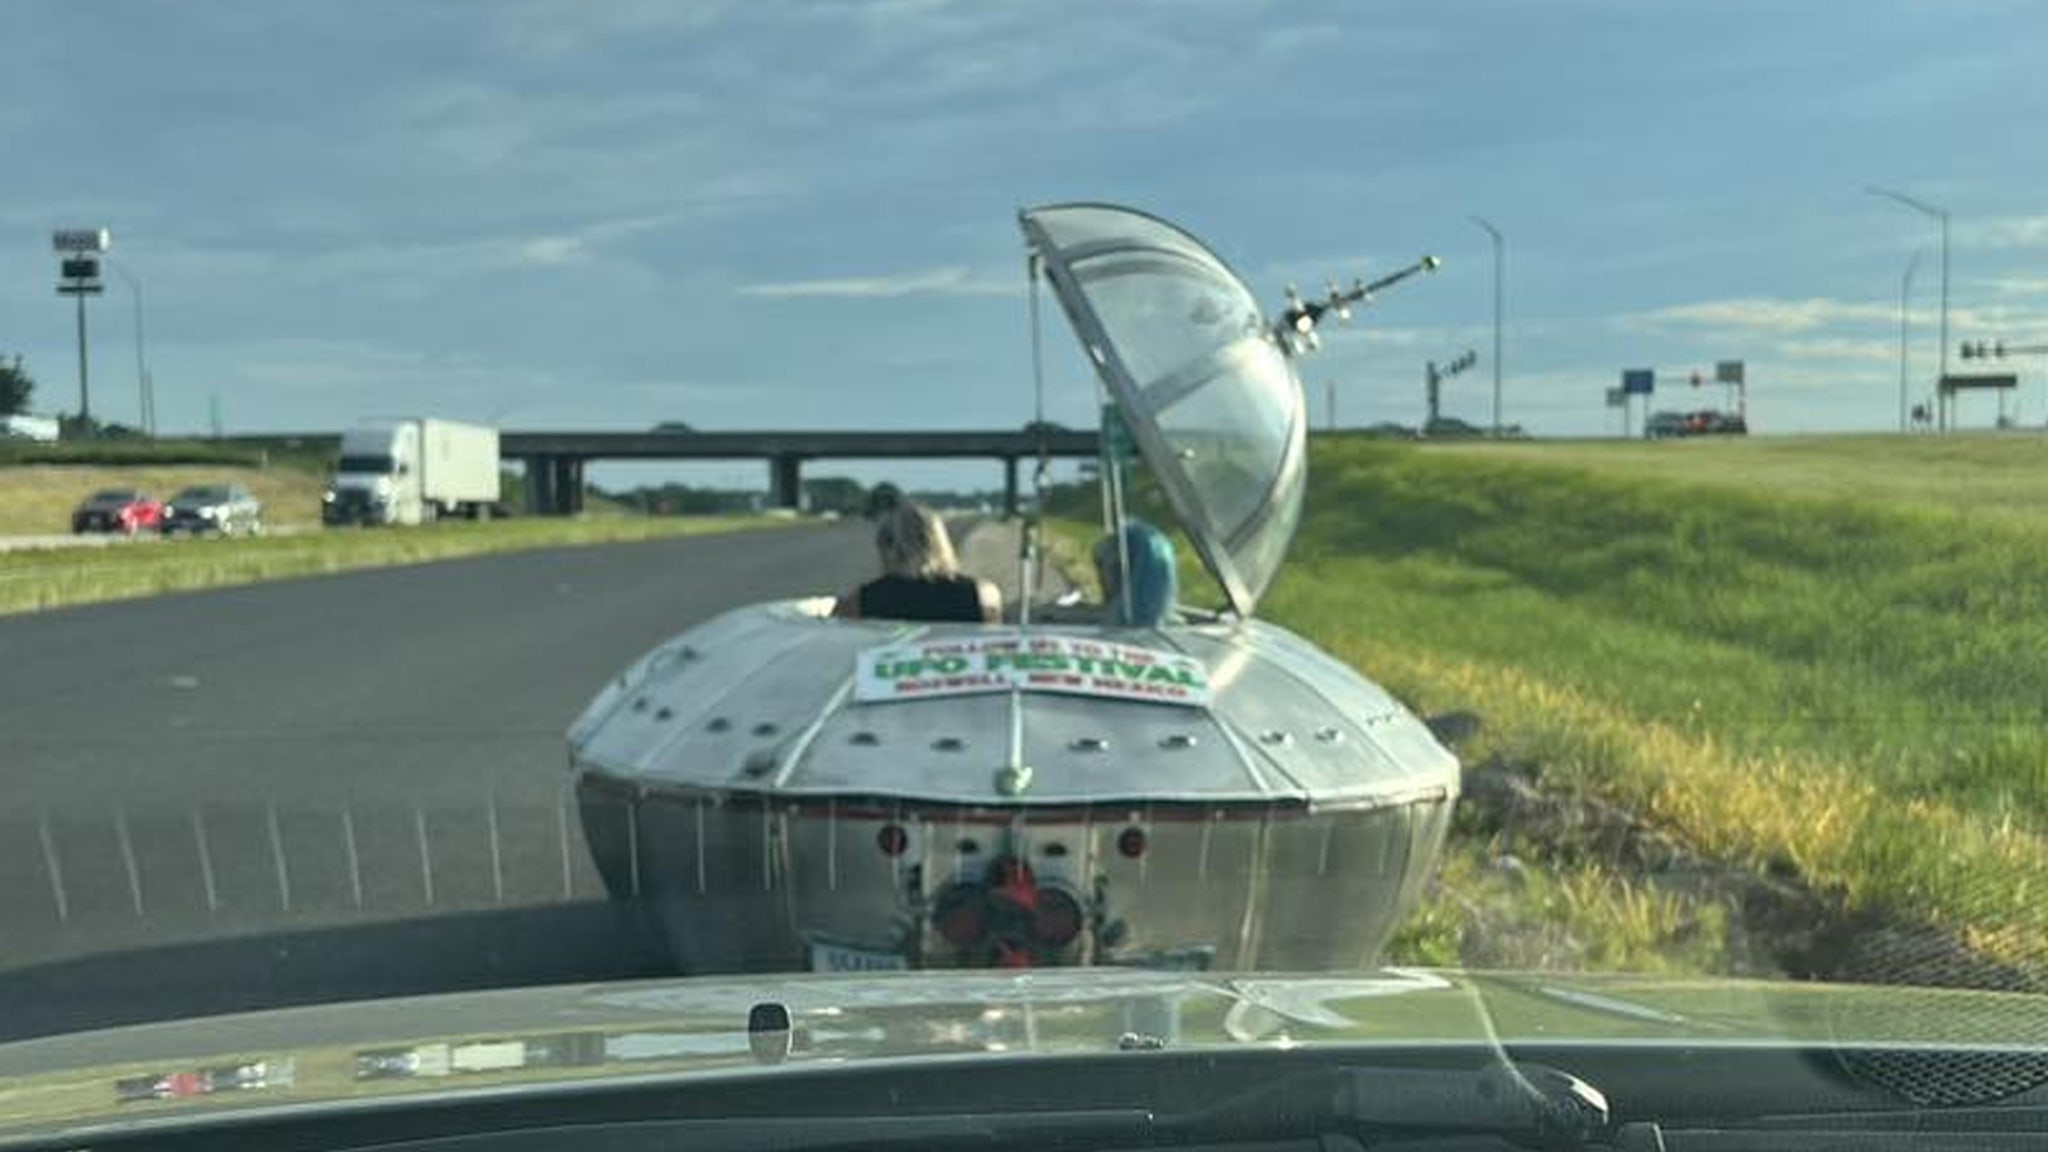 UFO Headed for Roswell, New Mexico Pulled Over In Missouri: 'Out of This World'